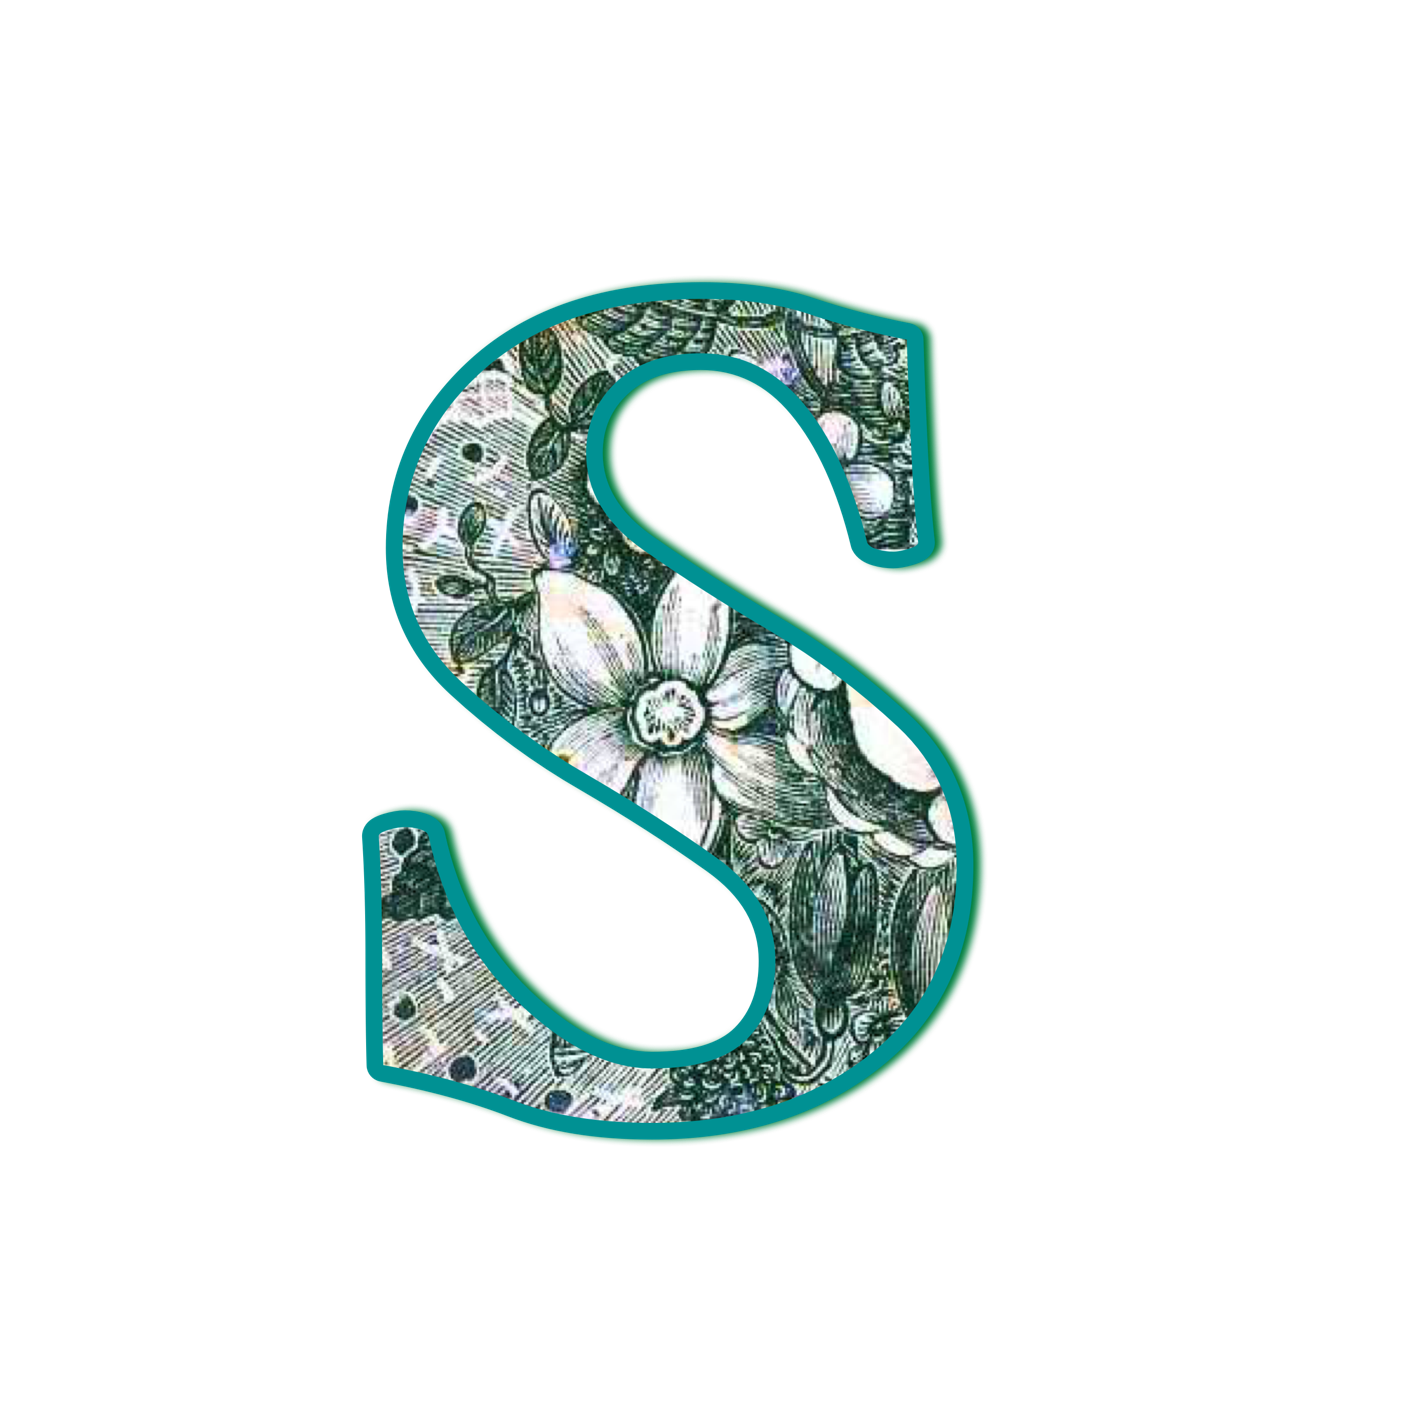 The letter S made from public domain, out-of-copyright "The Language of Flowers for The Women's Legacy Project, Legacy Tools, for the 2016 A to Z Blogging Challenge